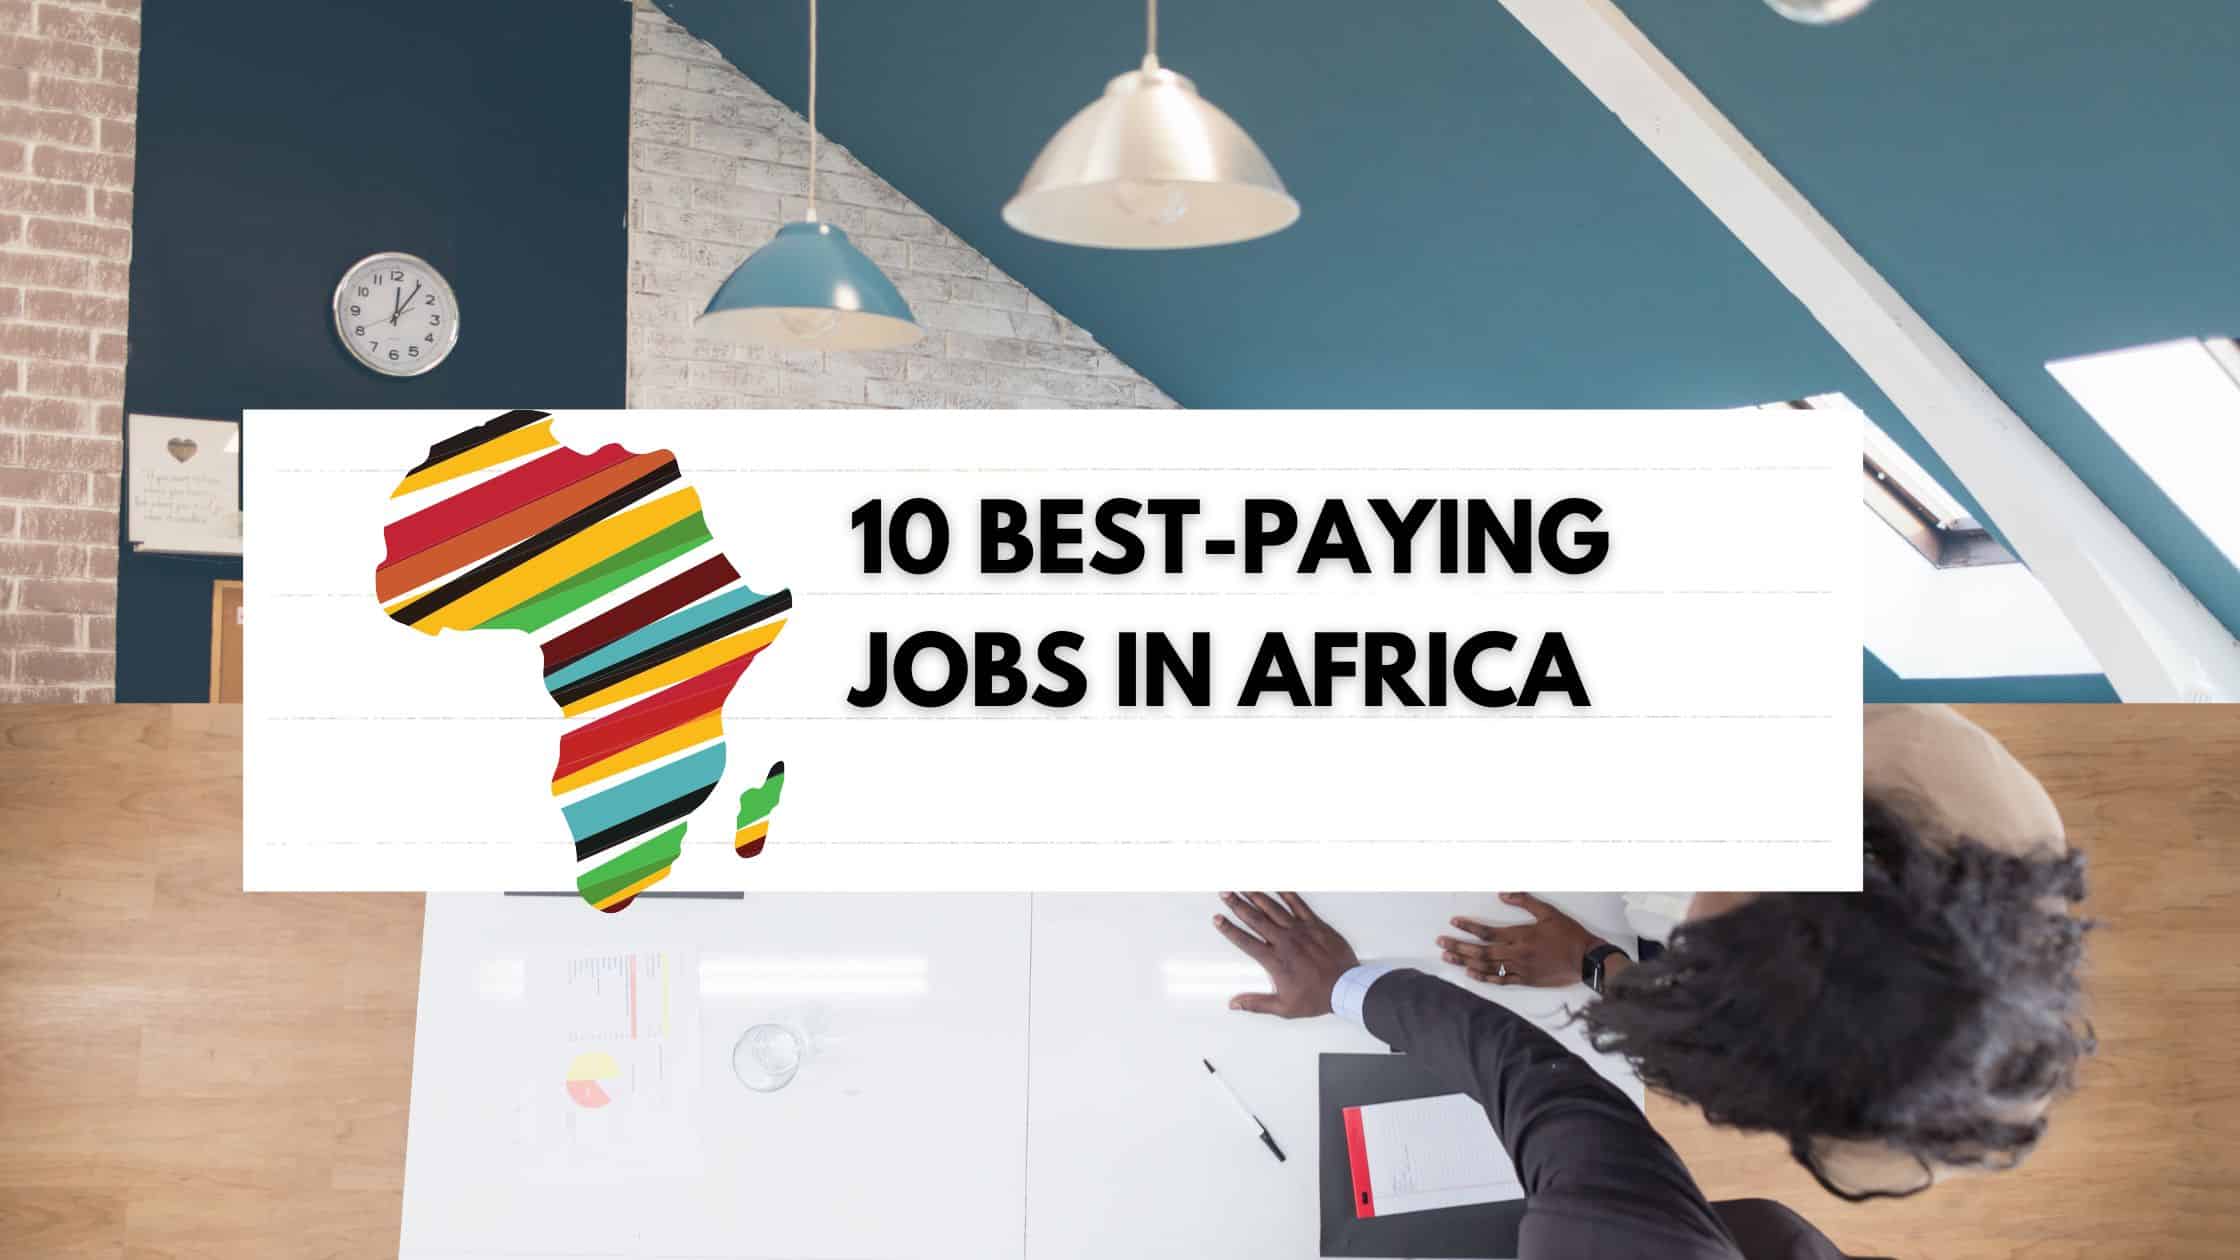 10 best-paying jobs in Africa